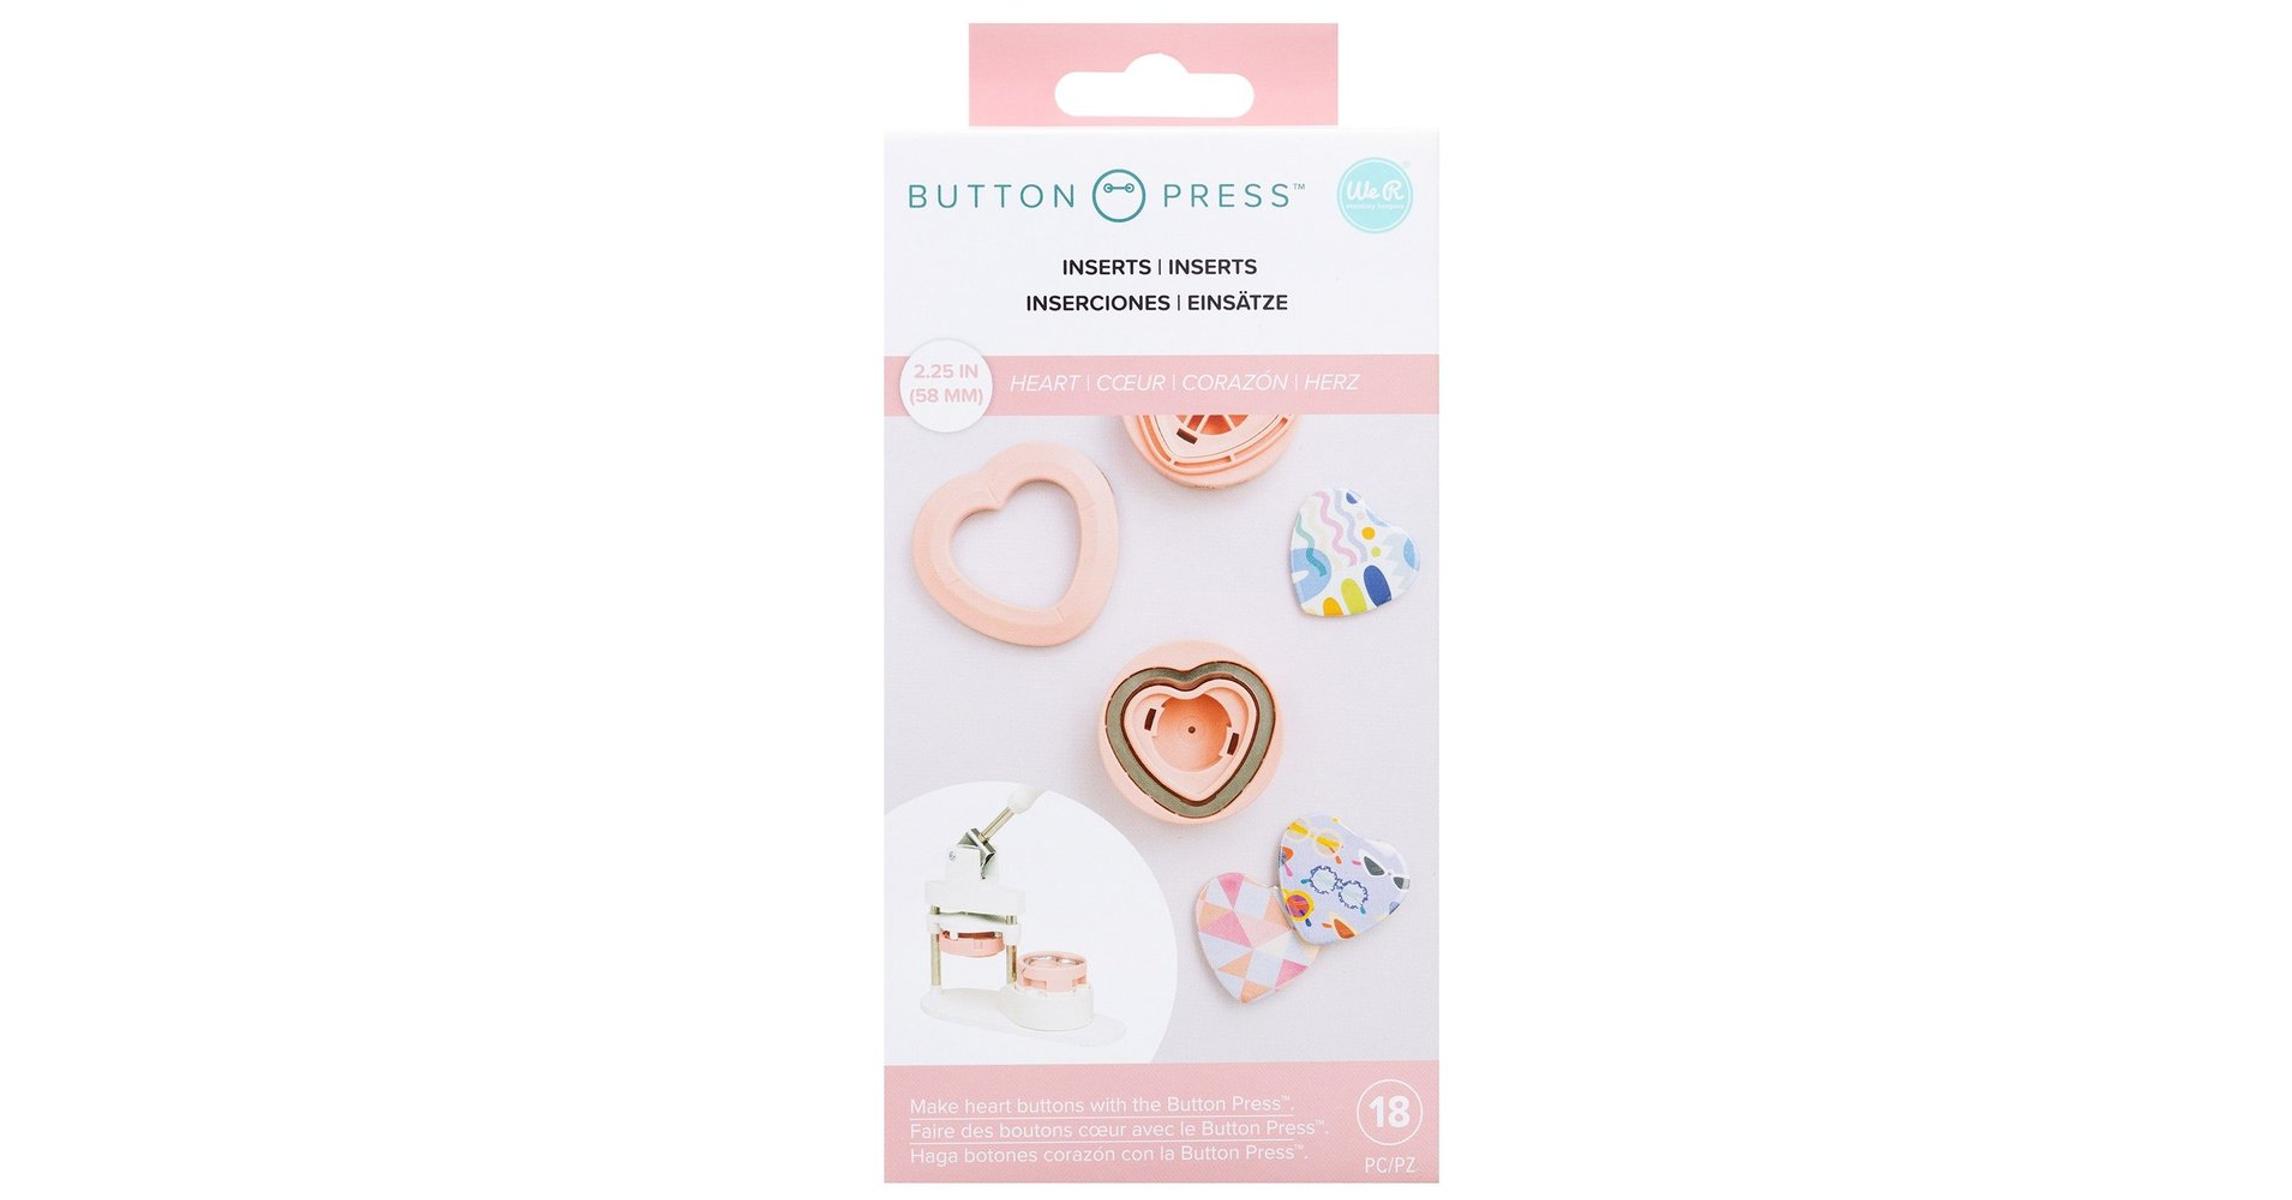 We R Memory Keepers, Button Press Bundle, Includes Button Press, Small,  Medium, Large Press Insert and Cutting Insert, 30 Buttons, 30 Foam  Stickers